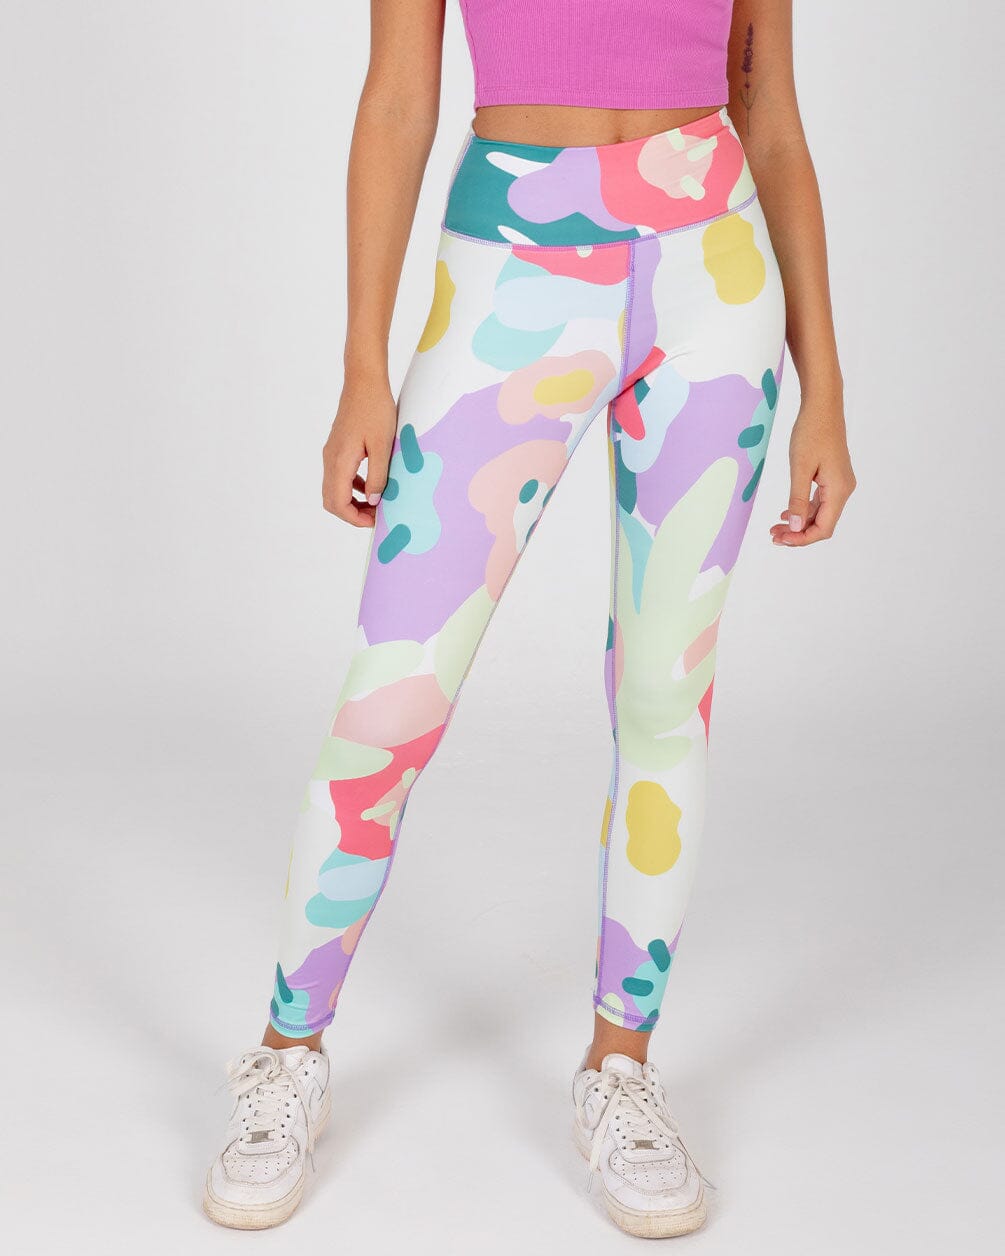 Flower Patches Leggings Leggings IN YOUR SHOE 